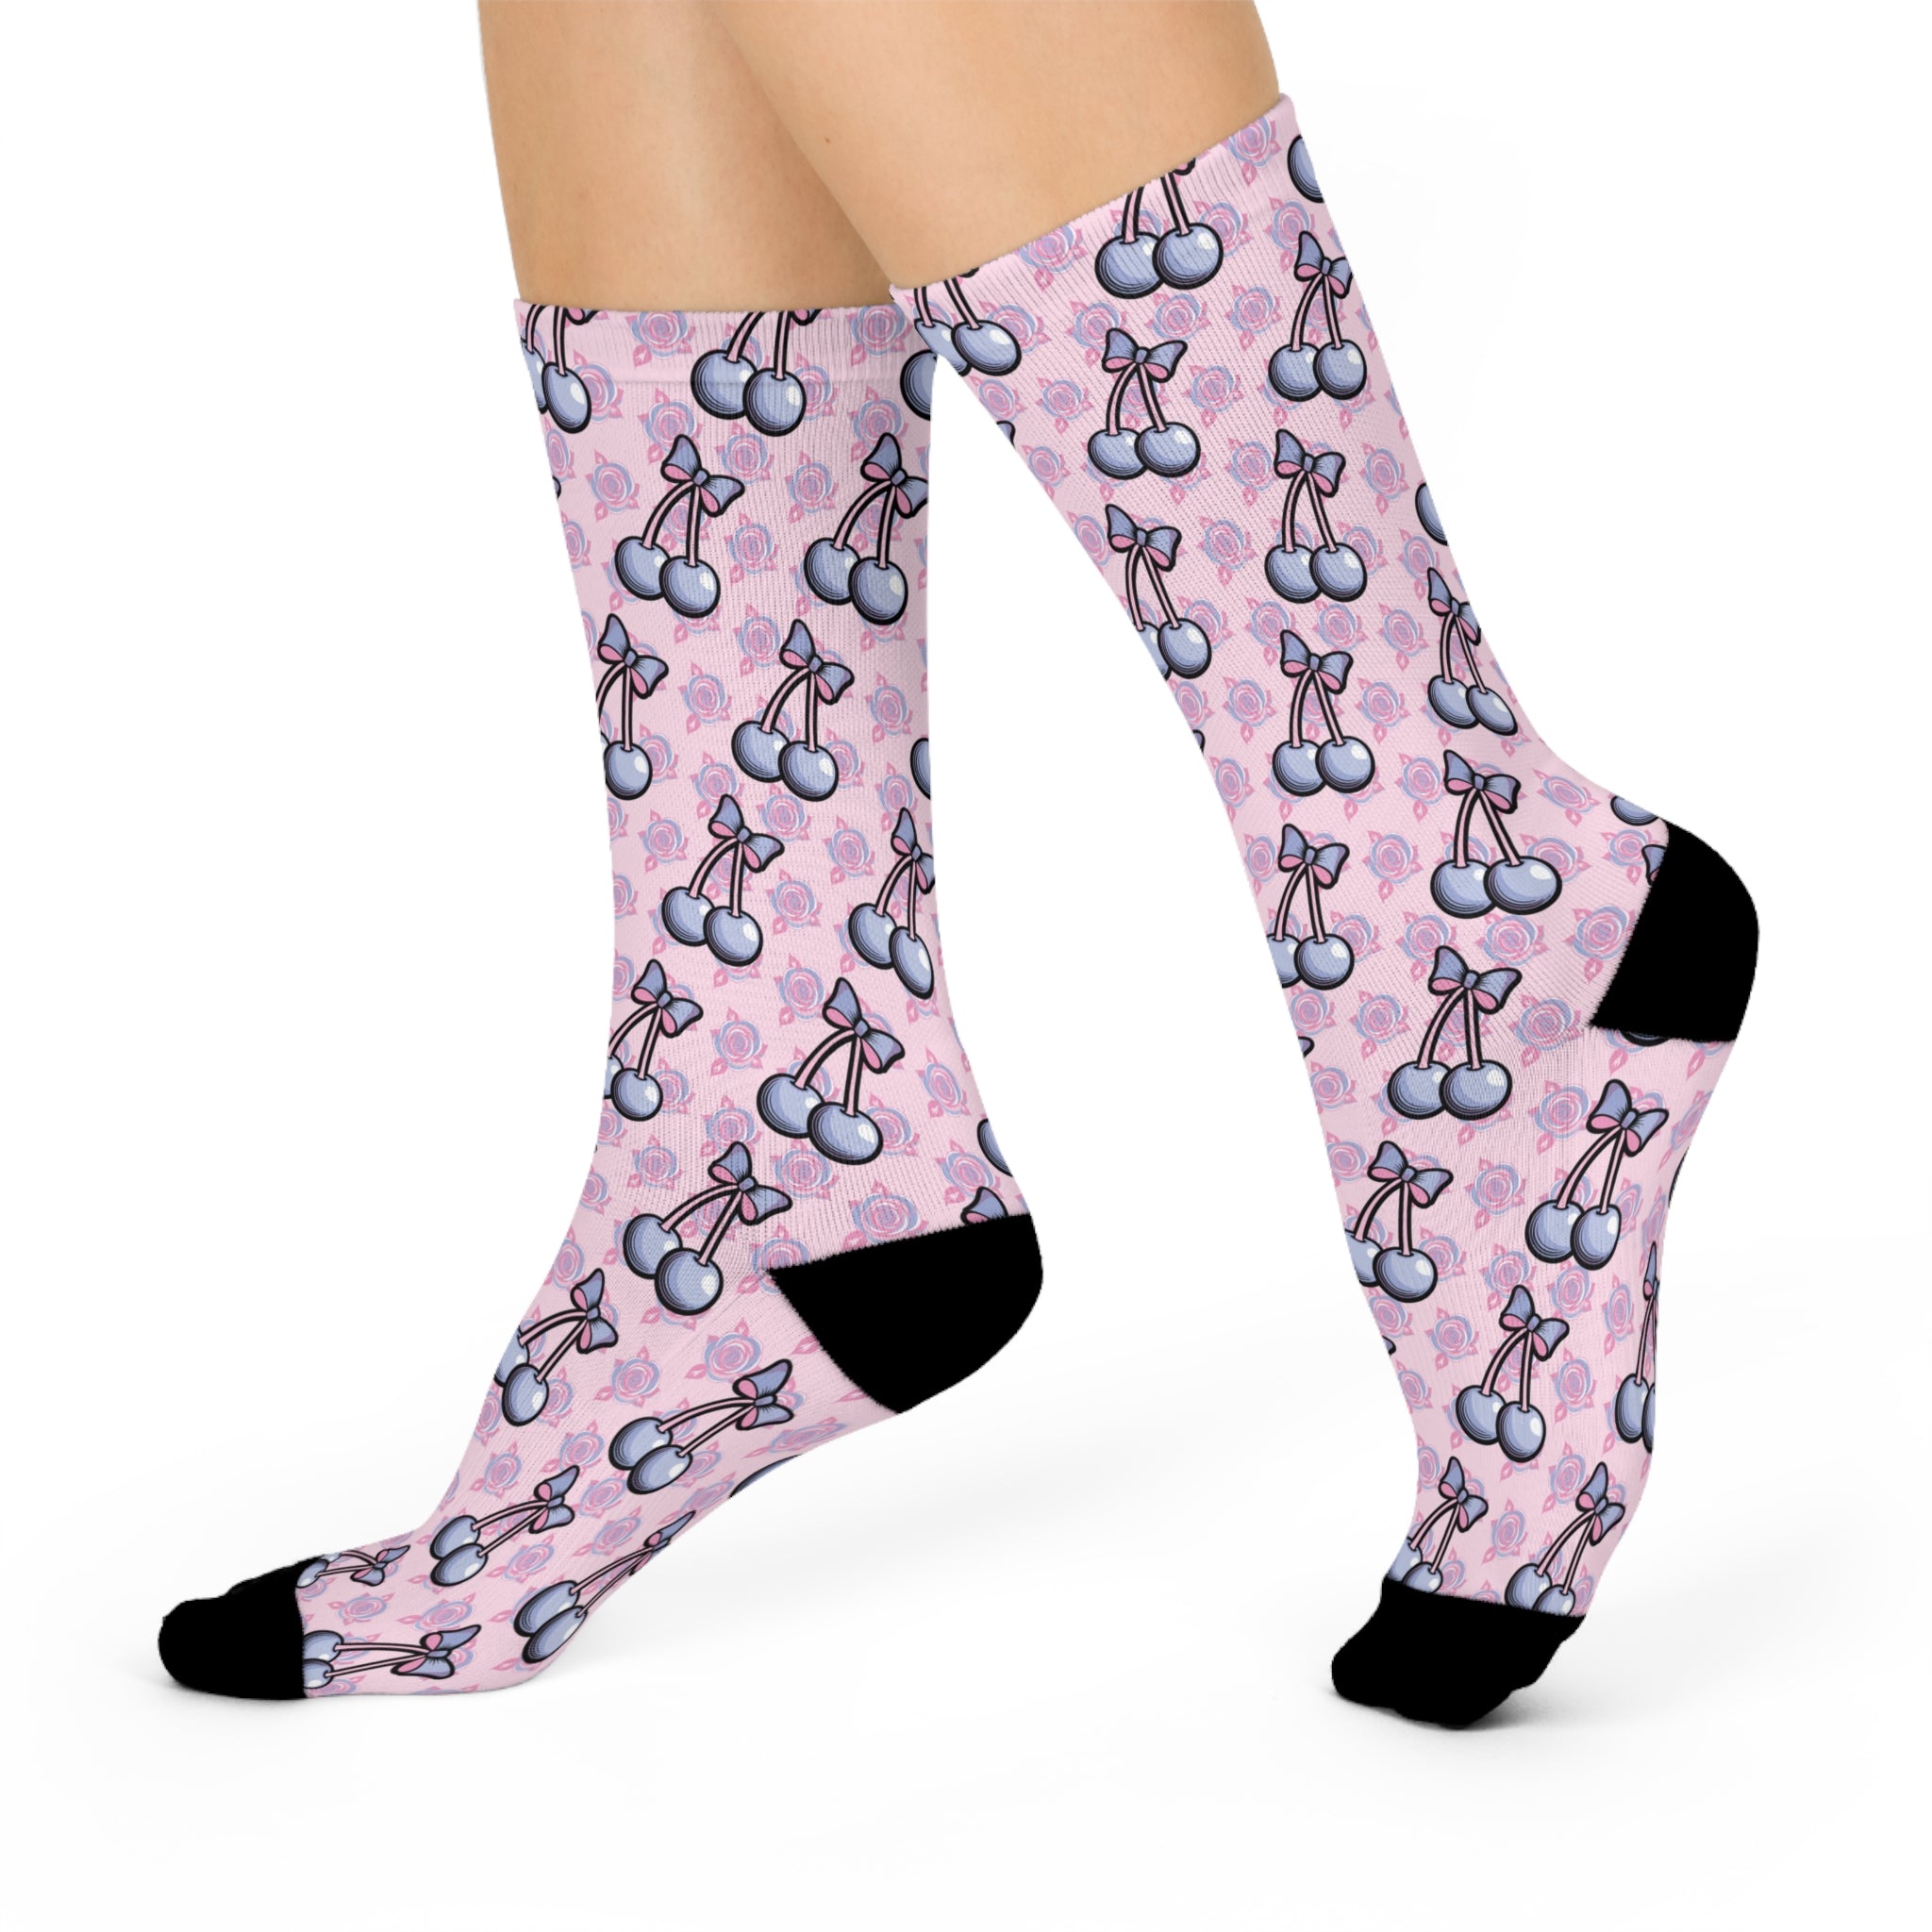 Pink crew socks with playful cherry and bow print. Retro-inspired design with a coquette aesthetic against a soft pink background. Black heel and toe accents.